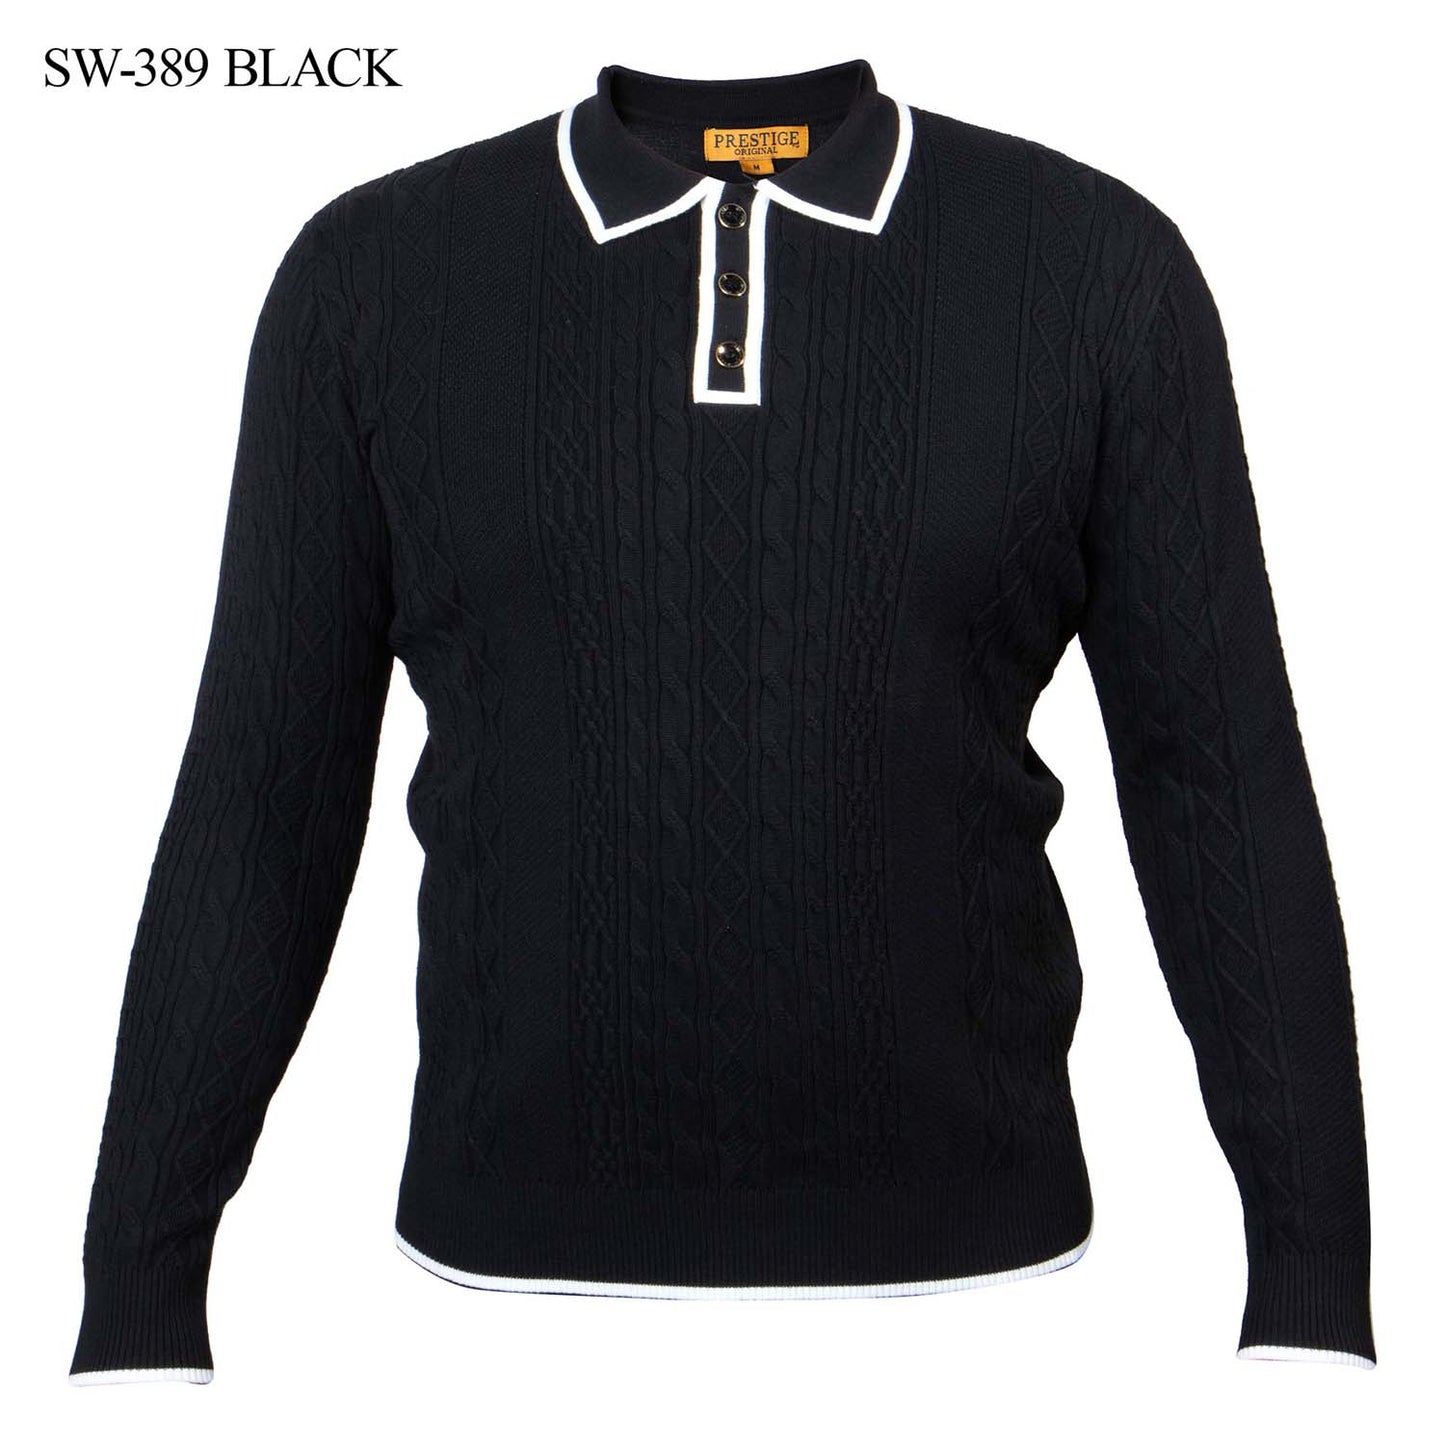 Prestige Highlight Cable Knit Sweater 389